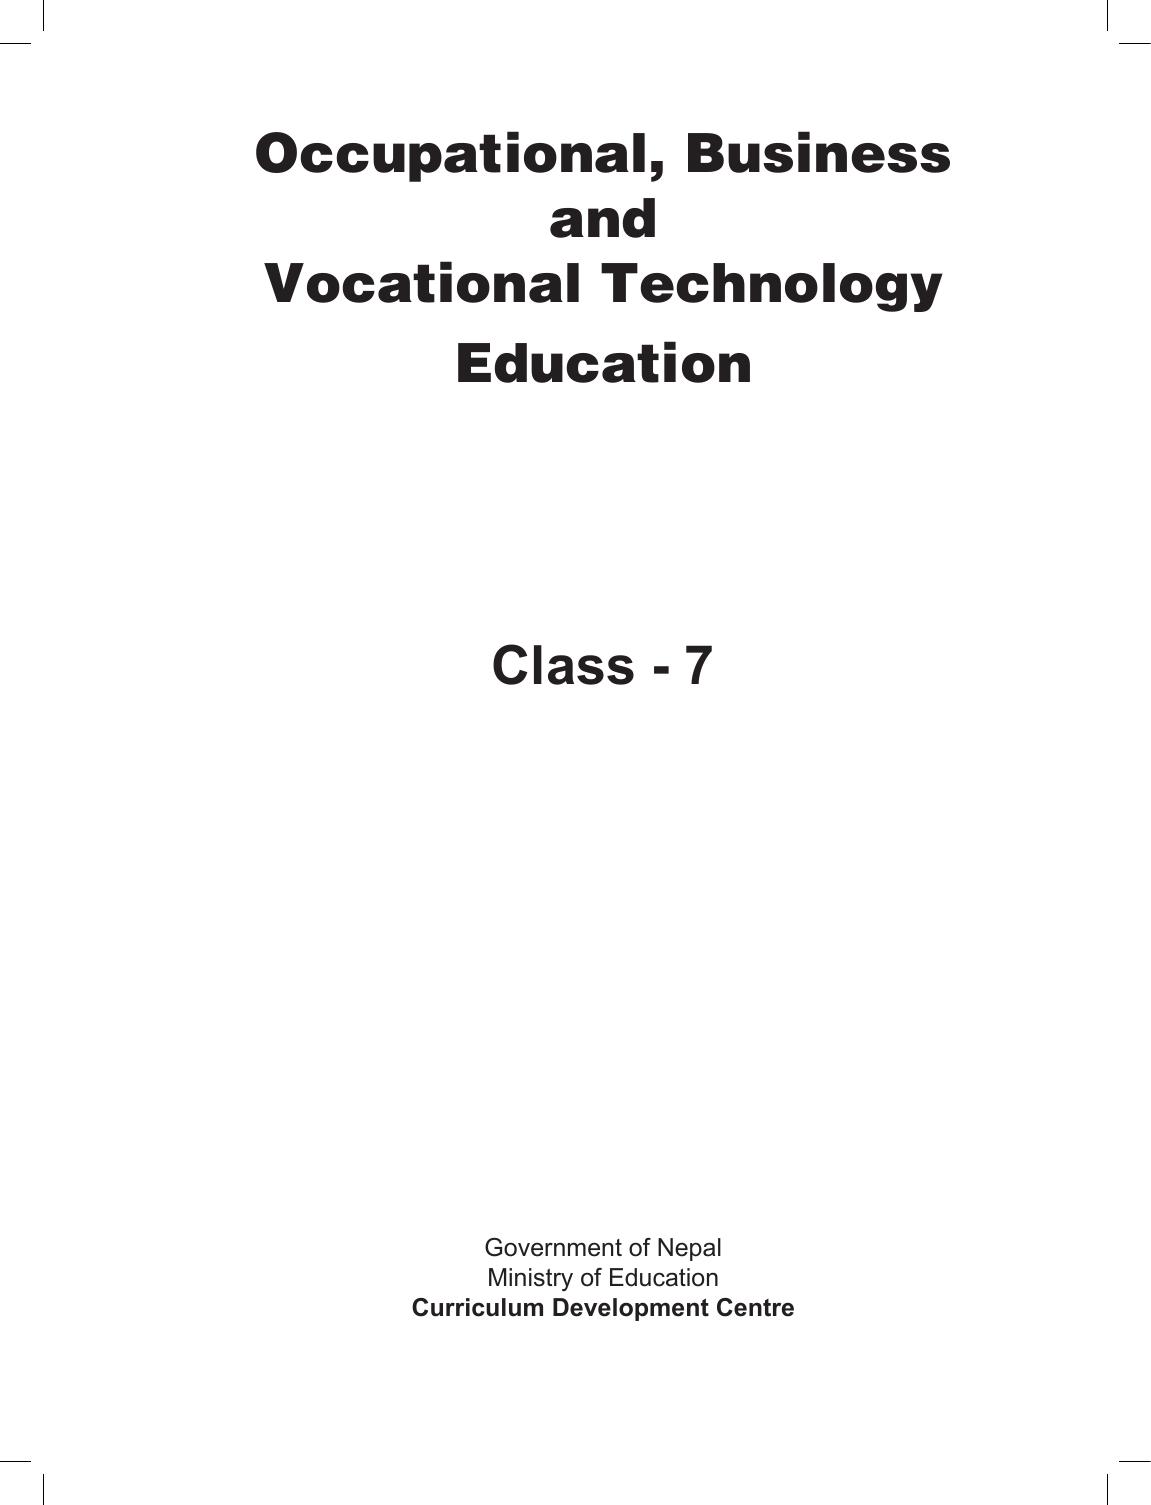 CDC 2017 - Occupation, Business and Vocational Technology Education  Grade 7